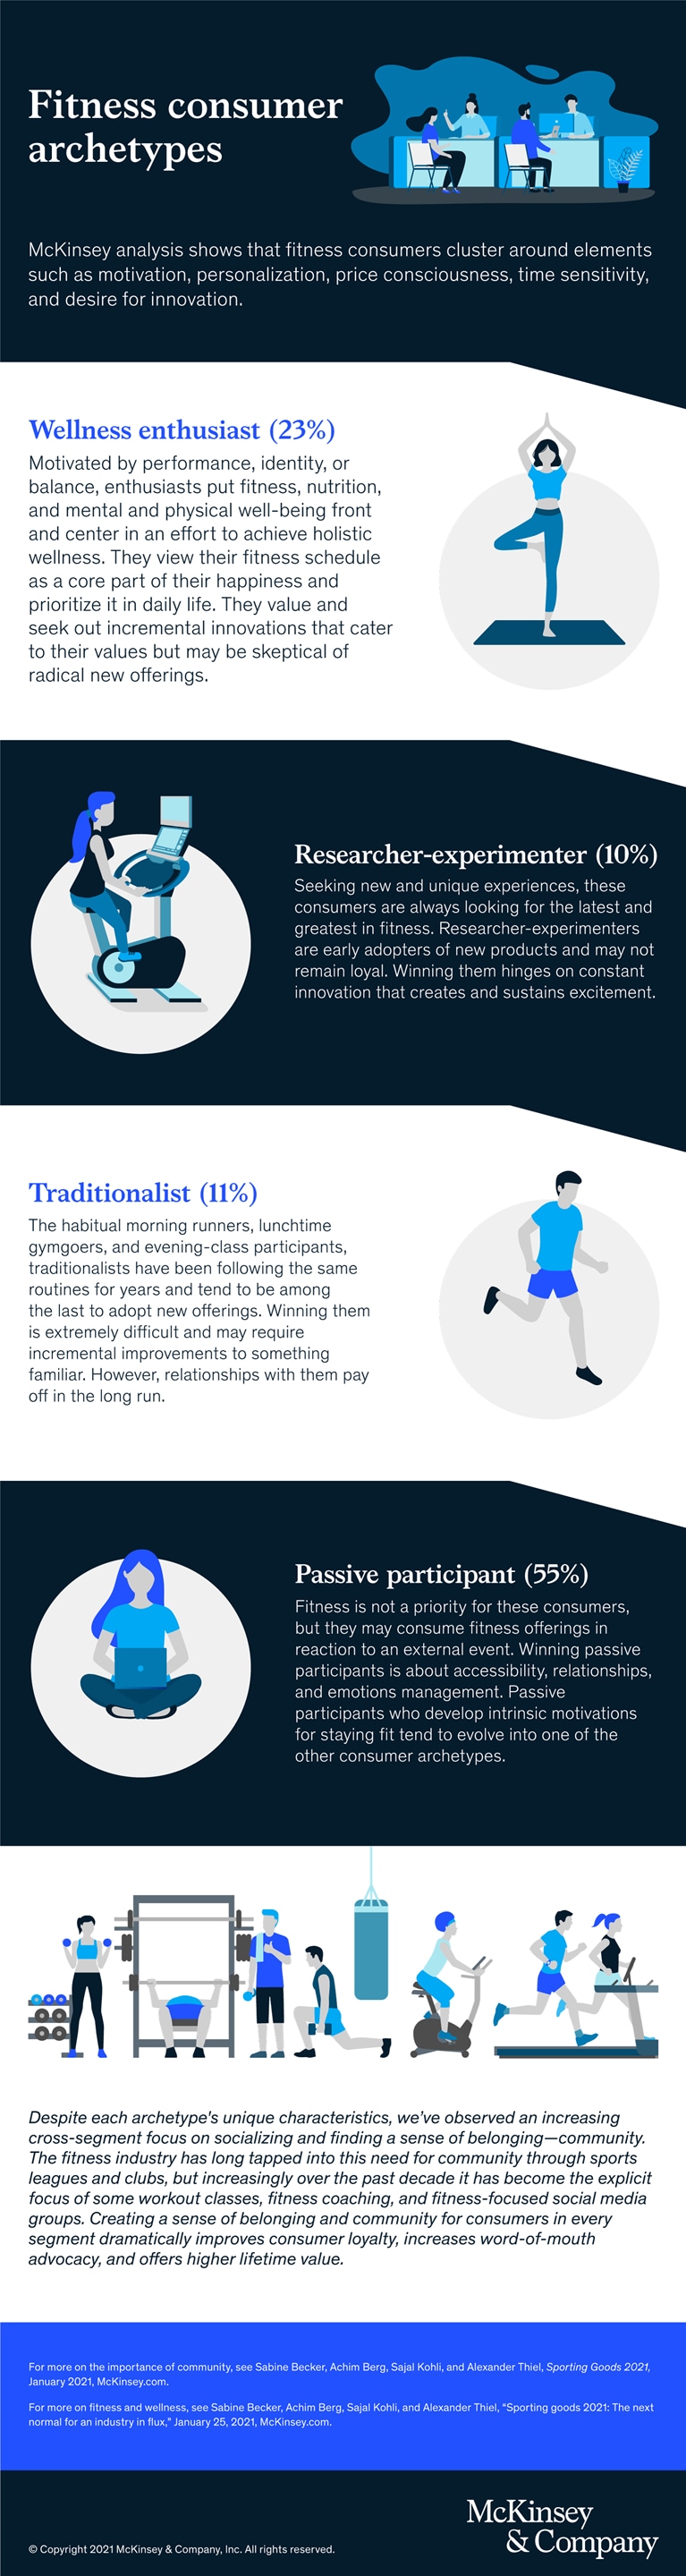 https://www.mckinsey.com/~/media/mckinsey/industries/consumer%20packaged%20goods/our%20insights/sweating%20for%20the%20fitness%20consumer/mck-winning-fitness-consumers-infographic-vf.png?cq=50&mw=767&cpy=Center